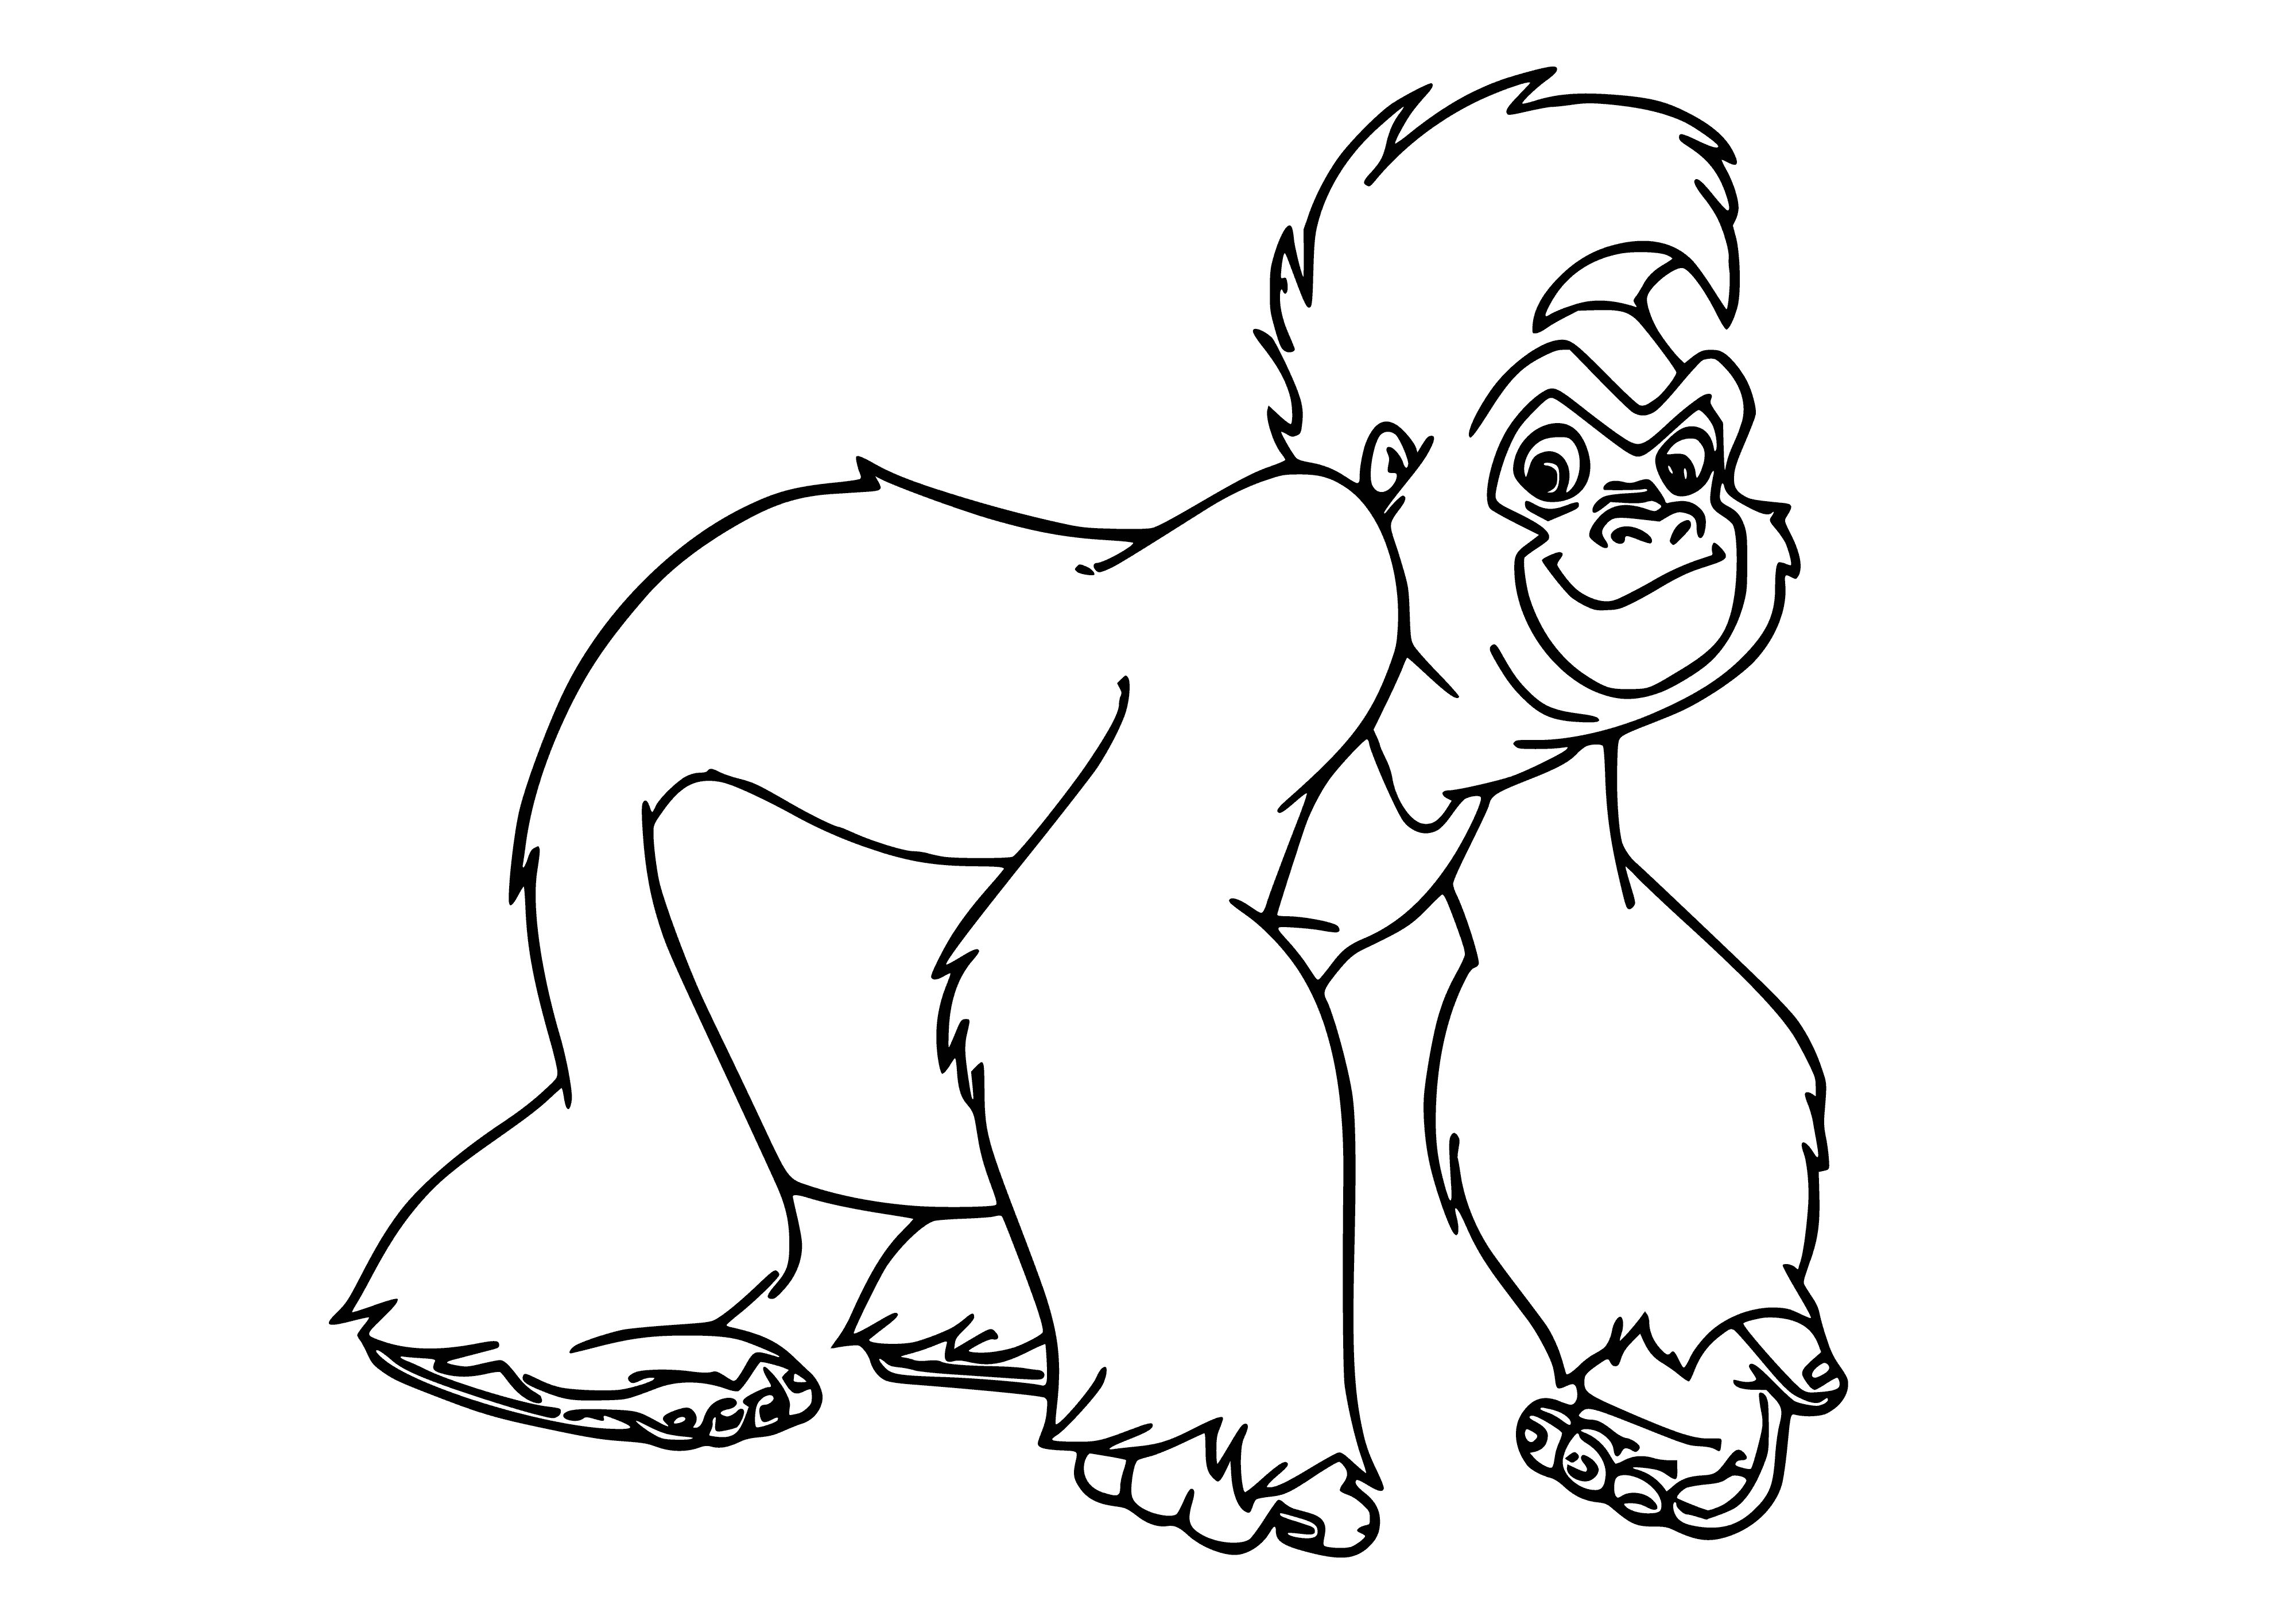 coloring page: Tarzan and Terk are close friends, often seen together in the jungle, and Terk is loyal and always helps Tarzan.